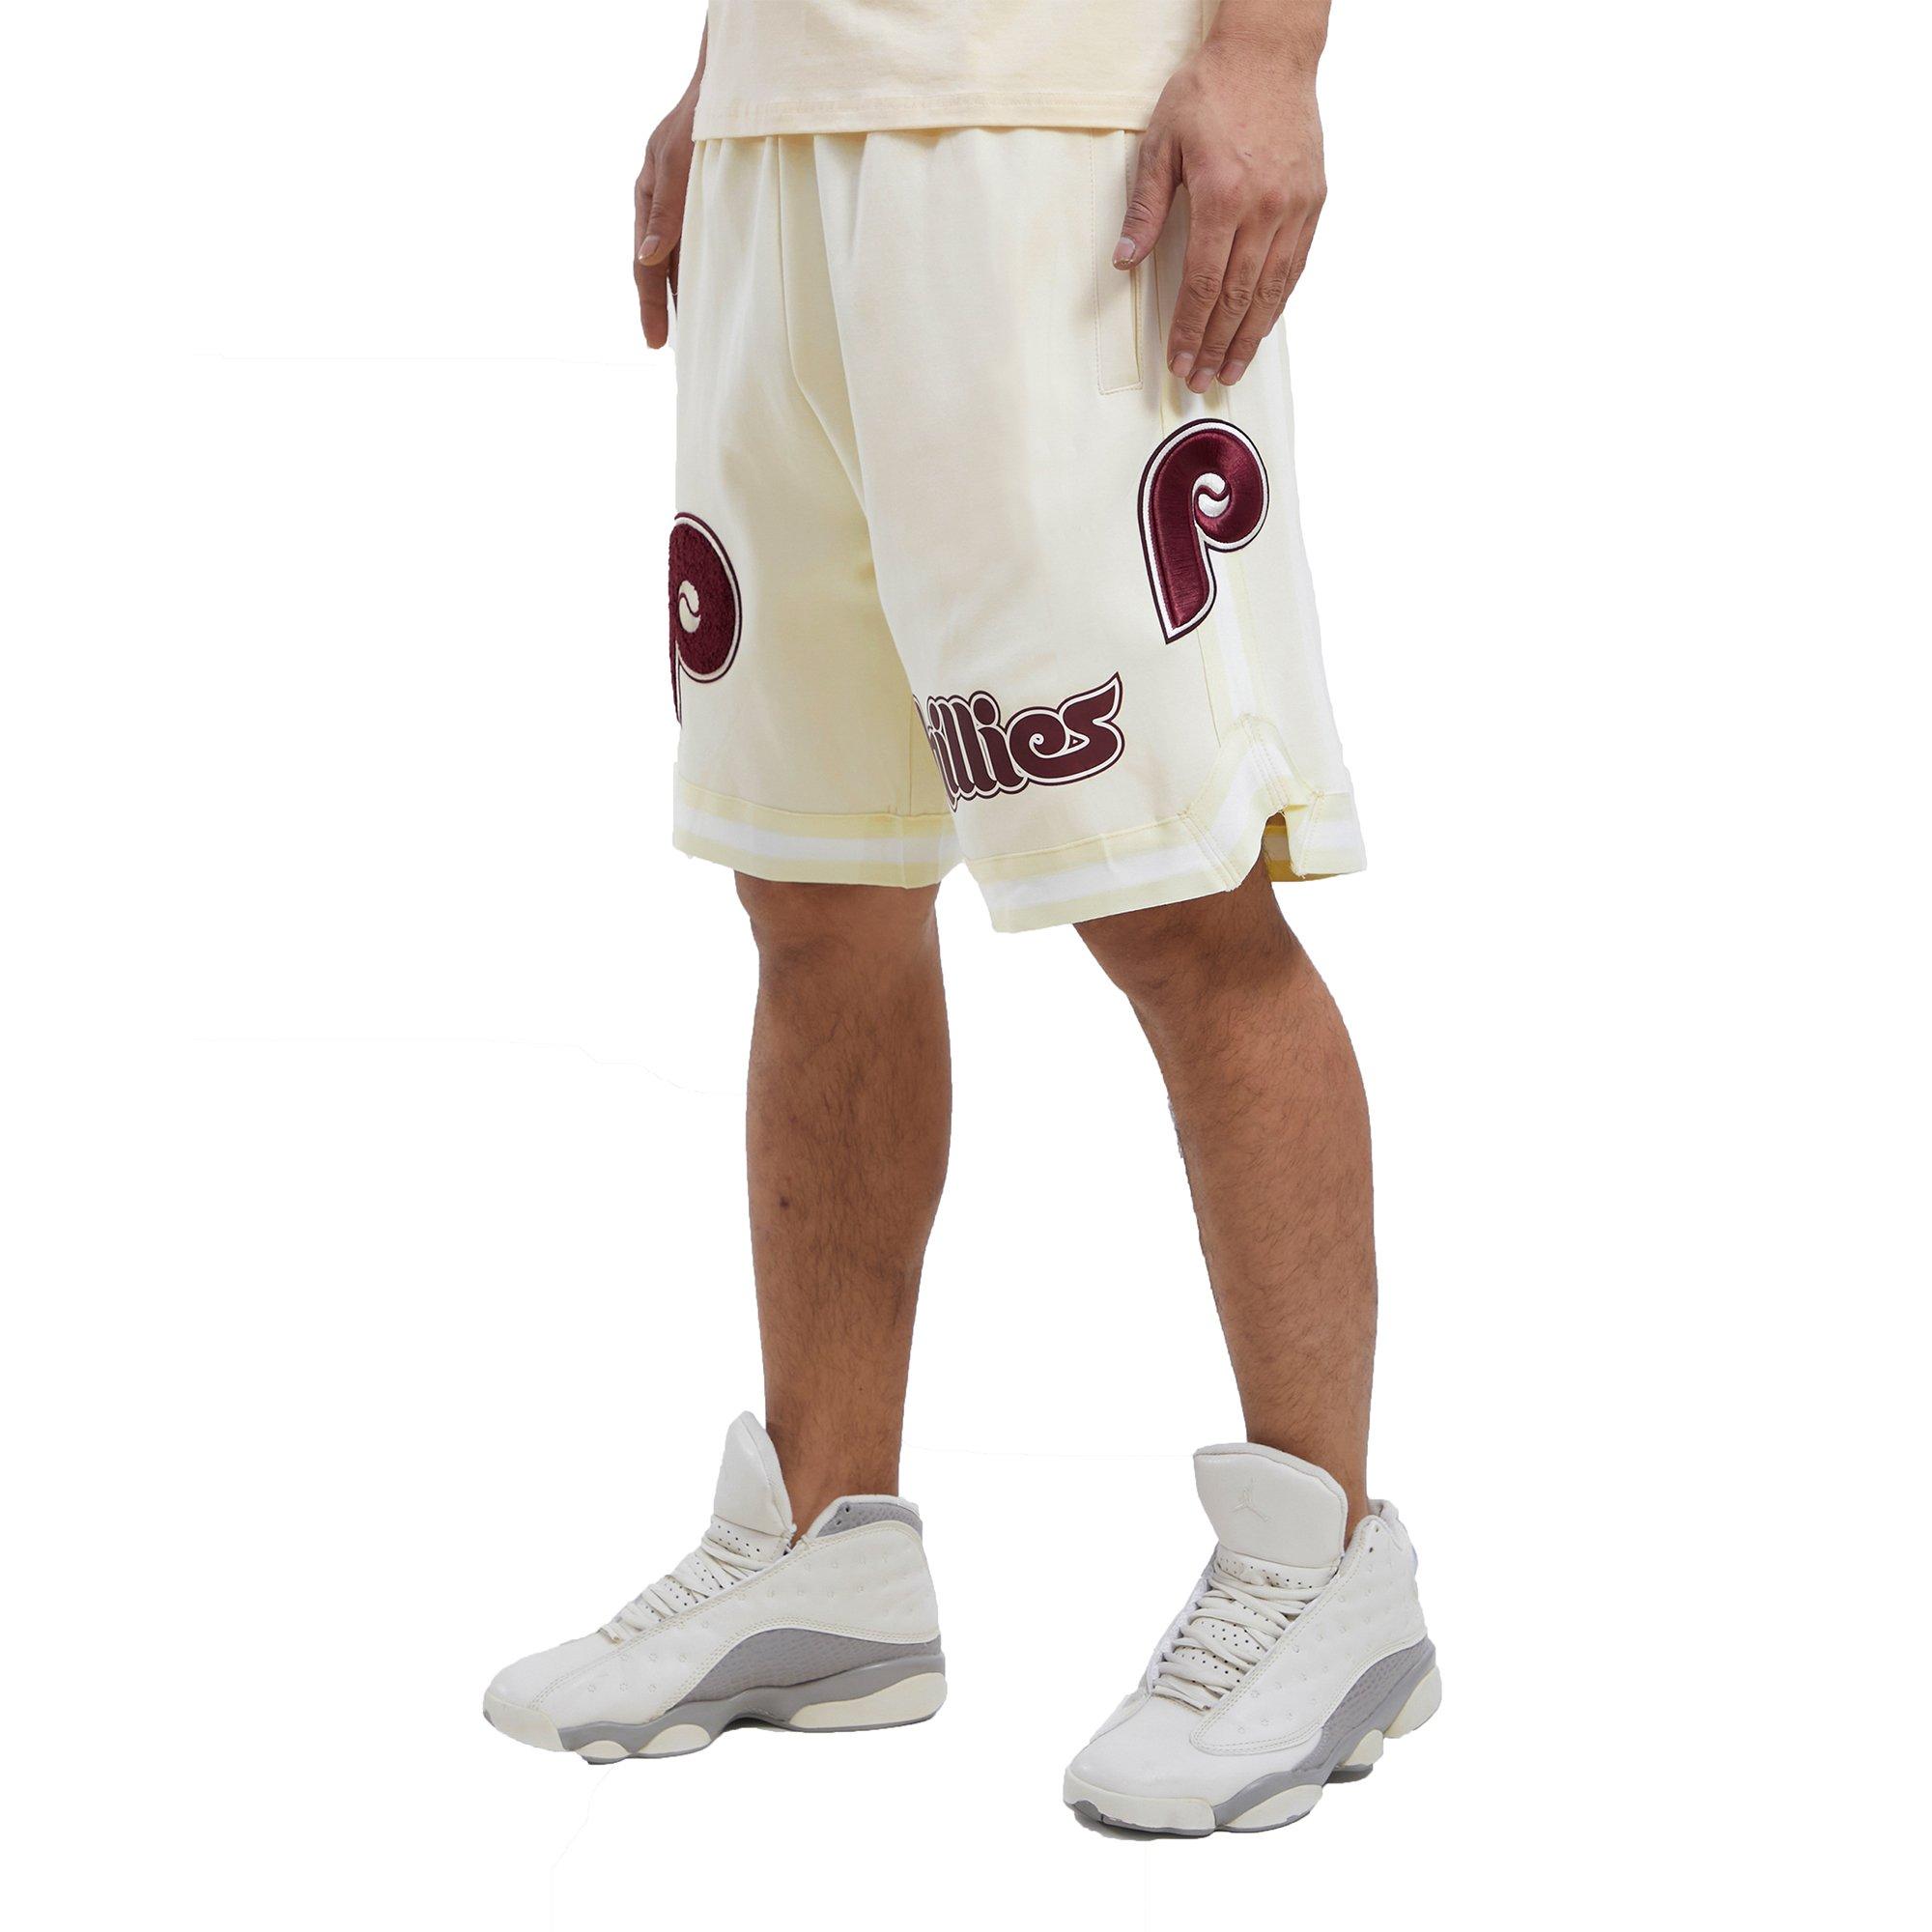 Philadelphia Phillies Mitchell & Ness Cooperstown Collection Just Don  Shorts - Burgundy